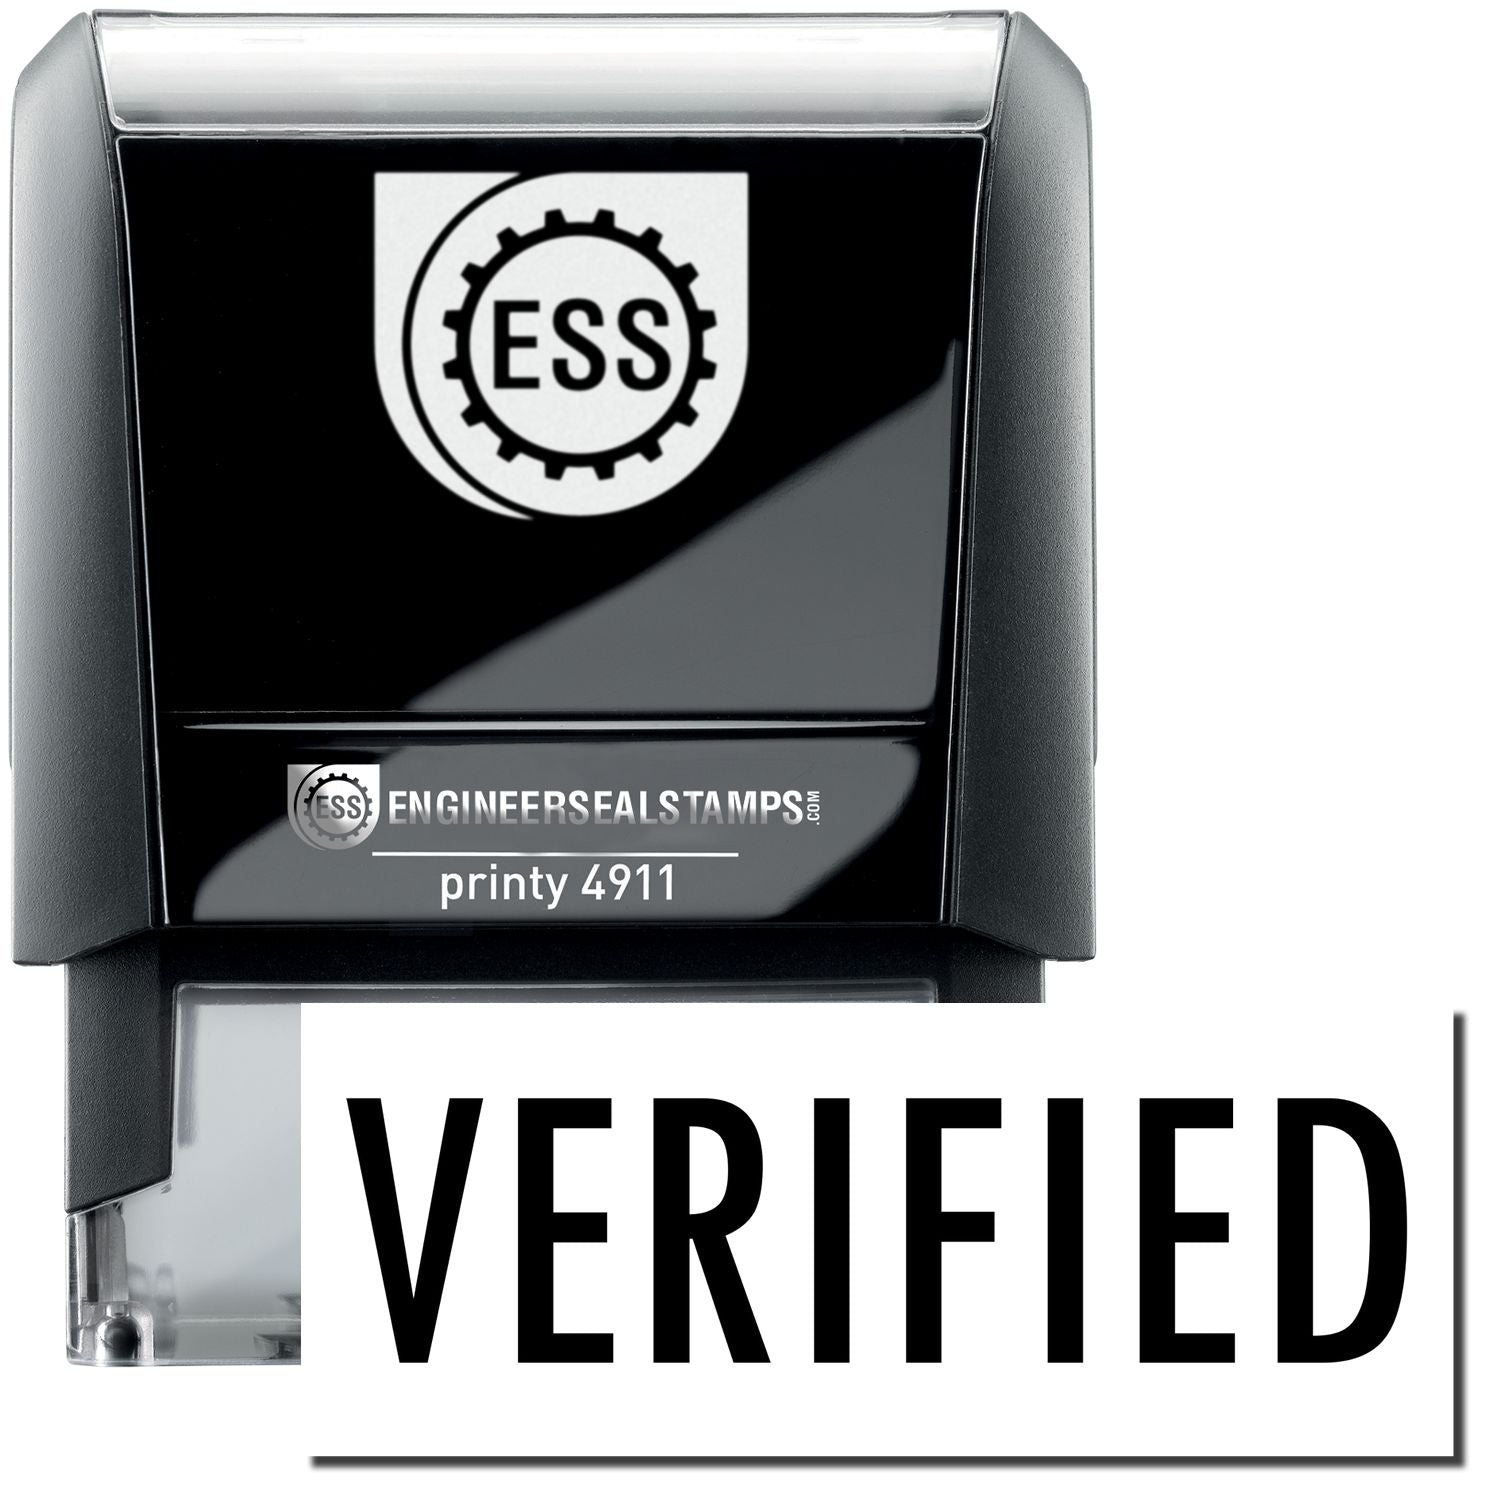 A self-inking stamp with a stamped image showing how the text "VERIFIED" is displayed after stamping.